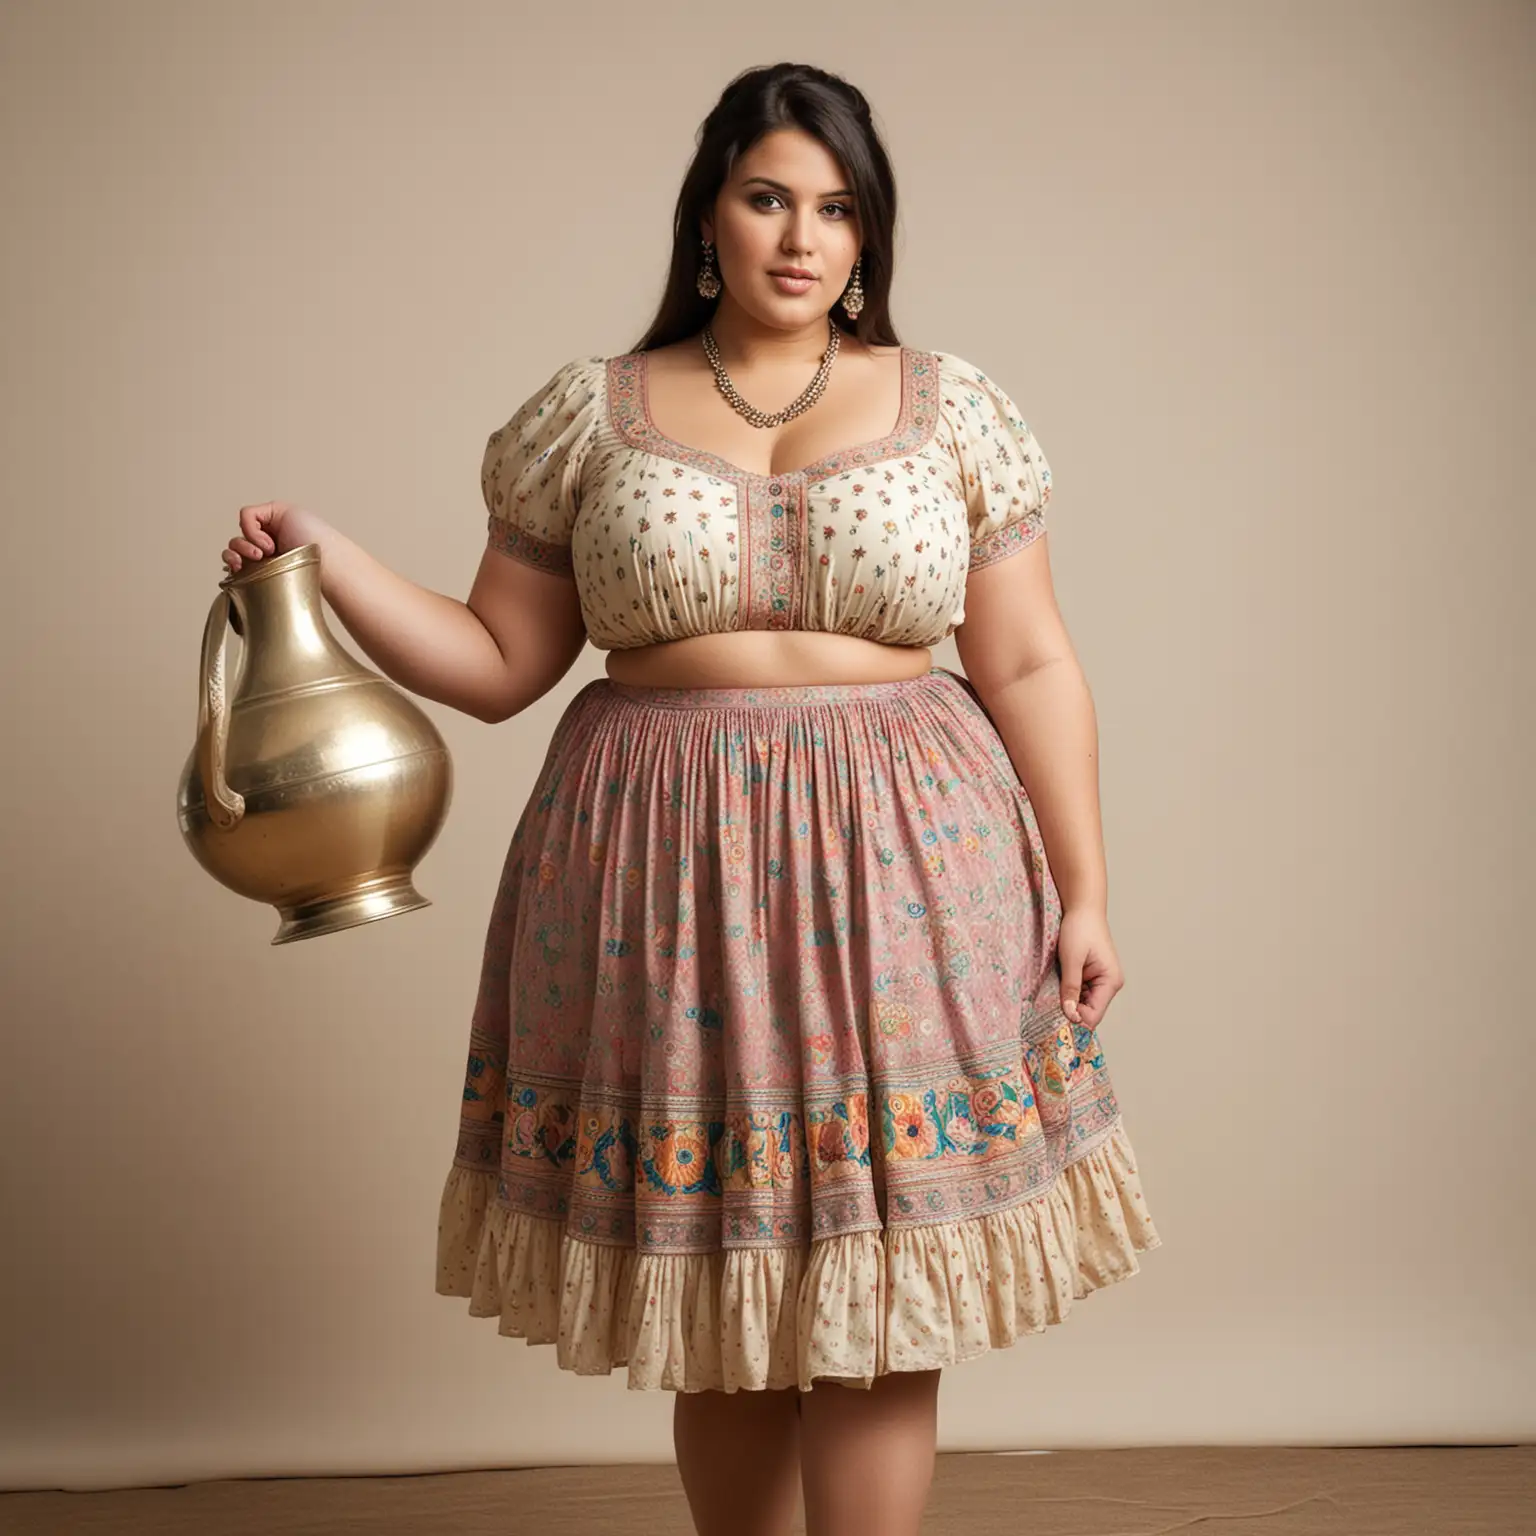 Curvy Woman in Vintage Indian Attire Carrying Water Pitcher